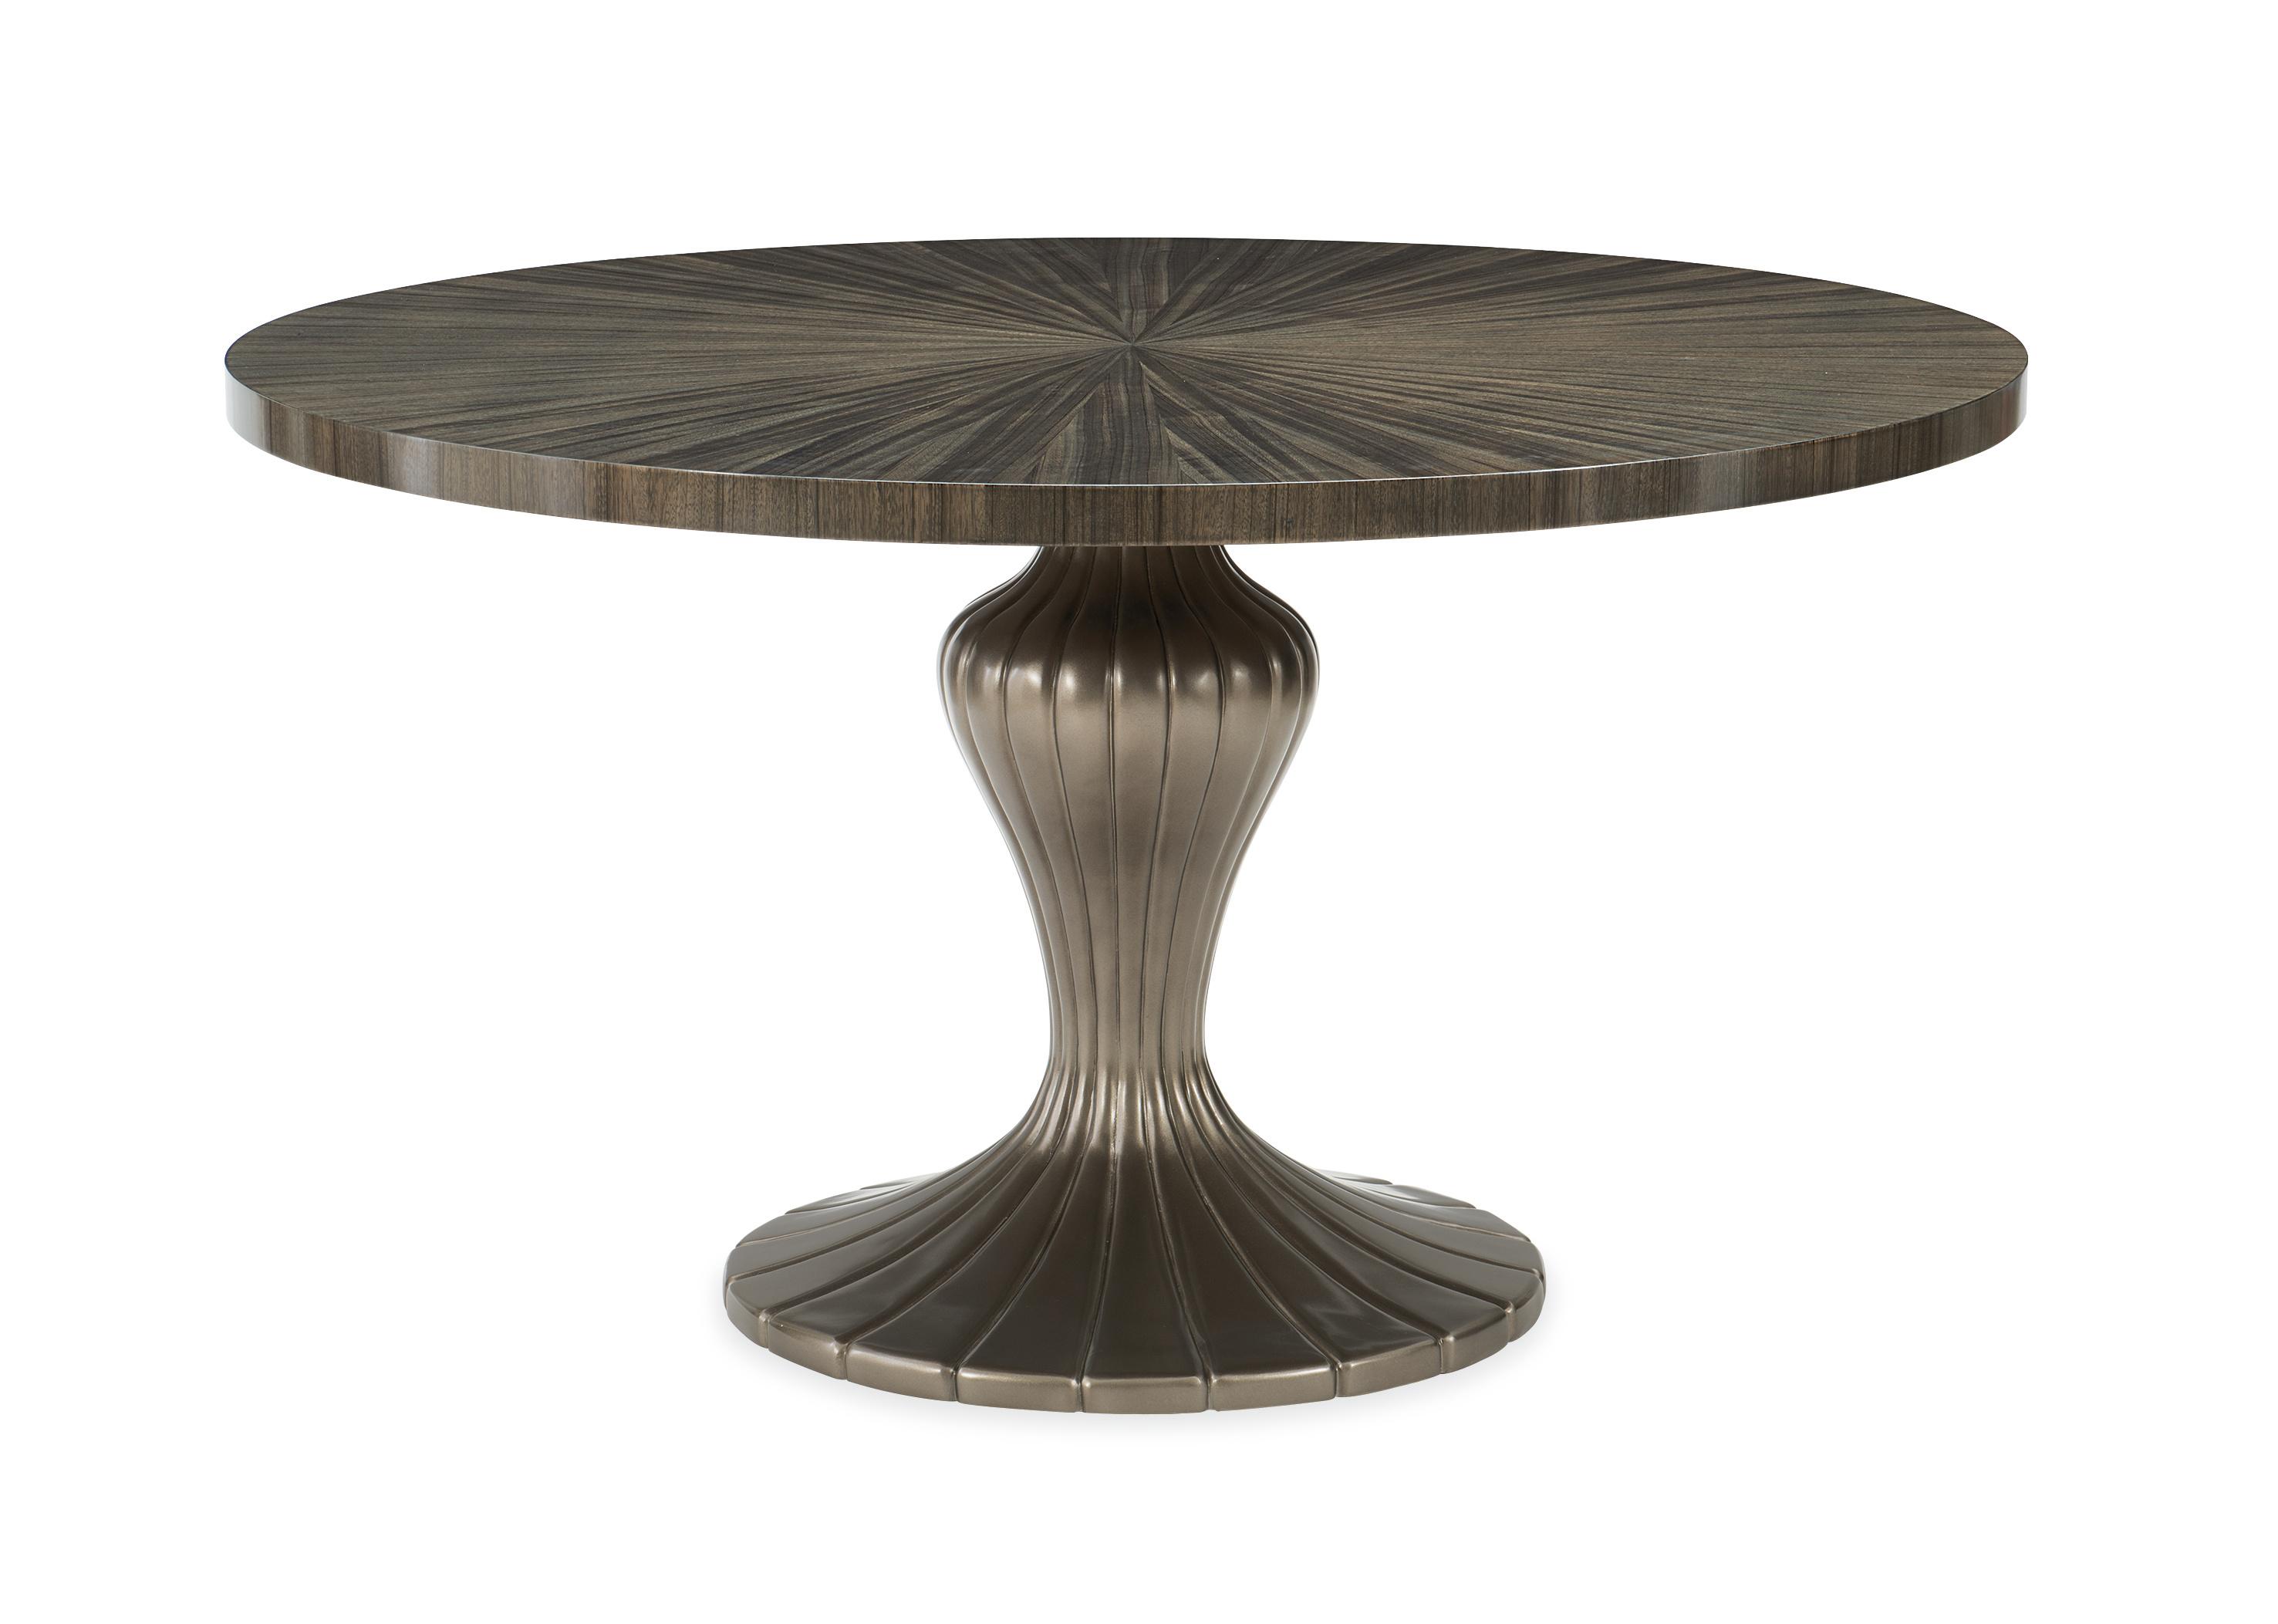 

    
Sepia & Harvest Bronze Finish Contemporary ROUND TABLE DISCUSSION Set 5Pcs by Caracole
